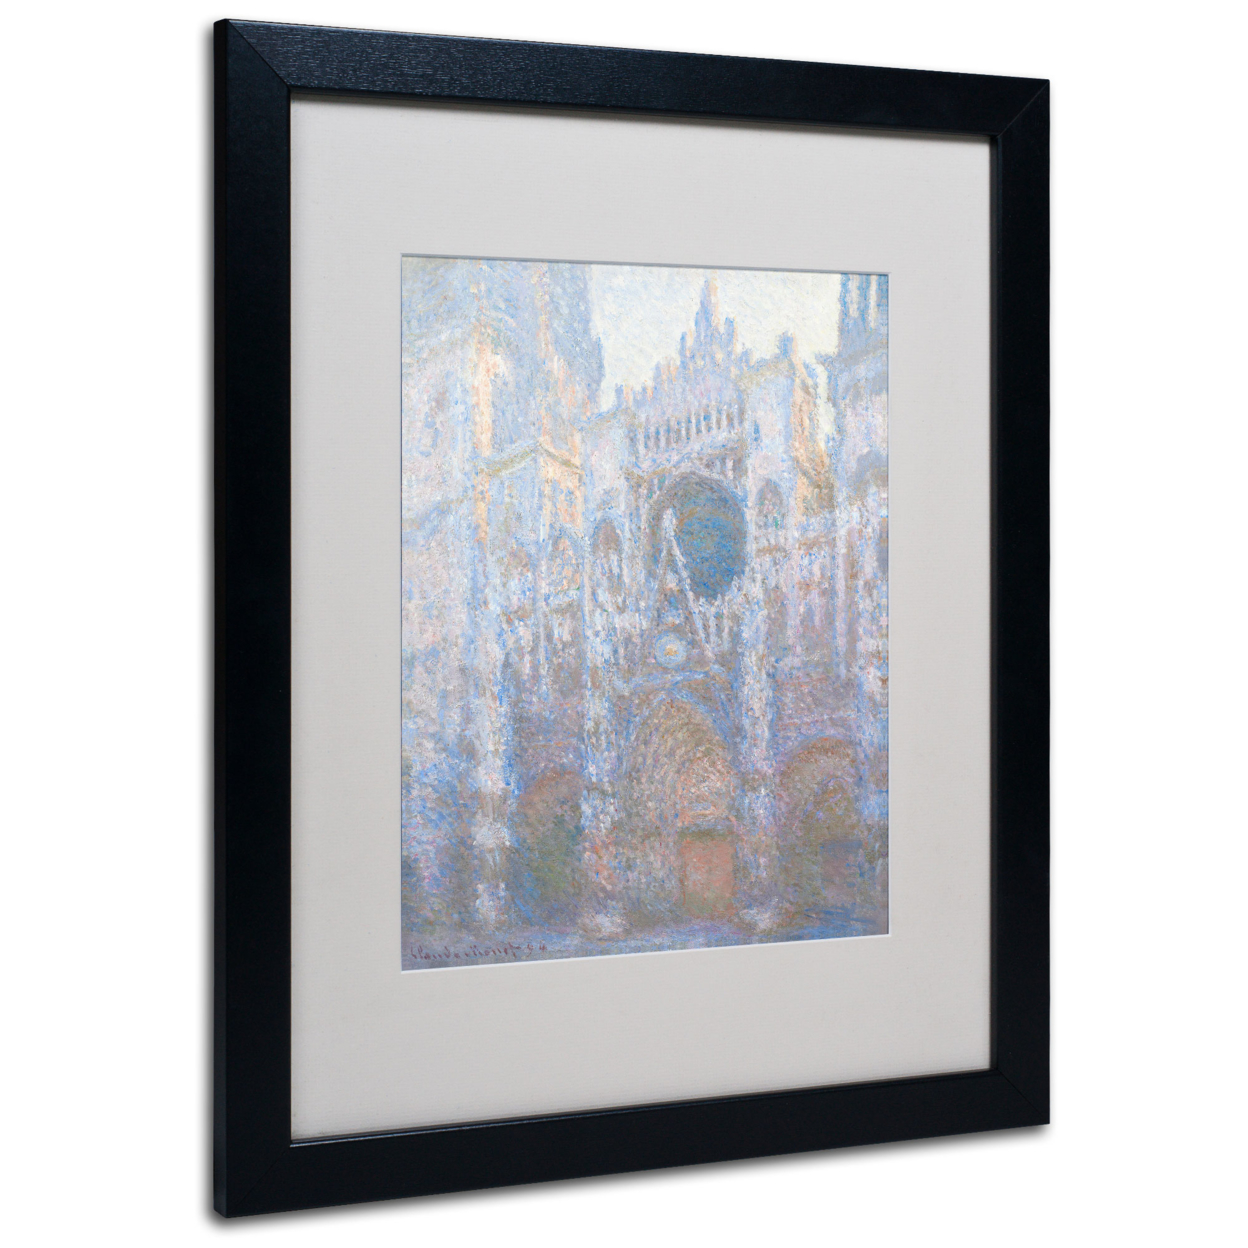 Claude Monet 'Rouen Cathedral West Facade 1894' Black Wooden Framed Art 18 X 22 Inches